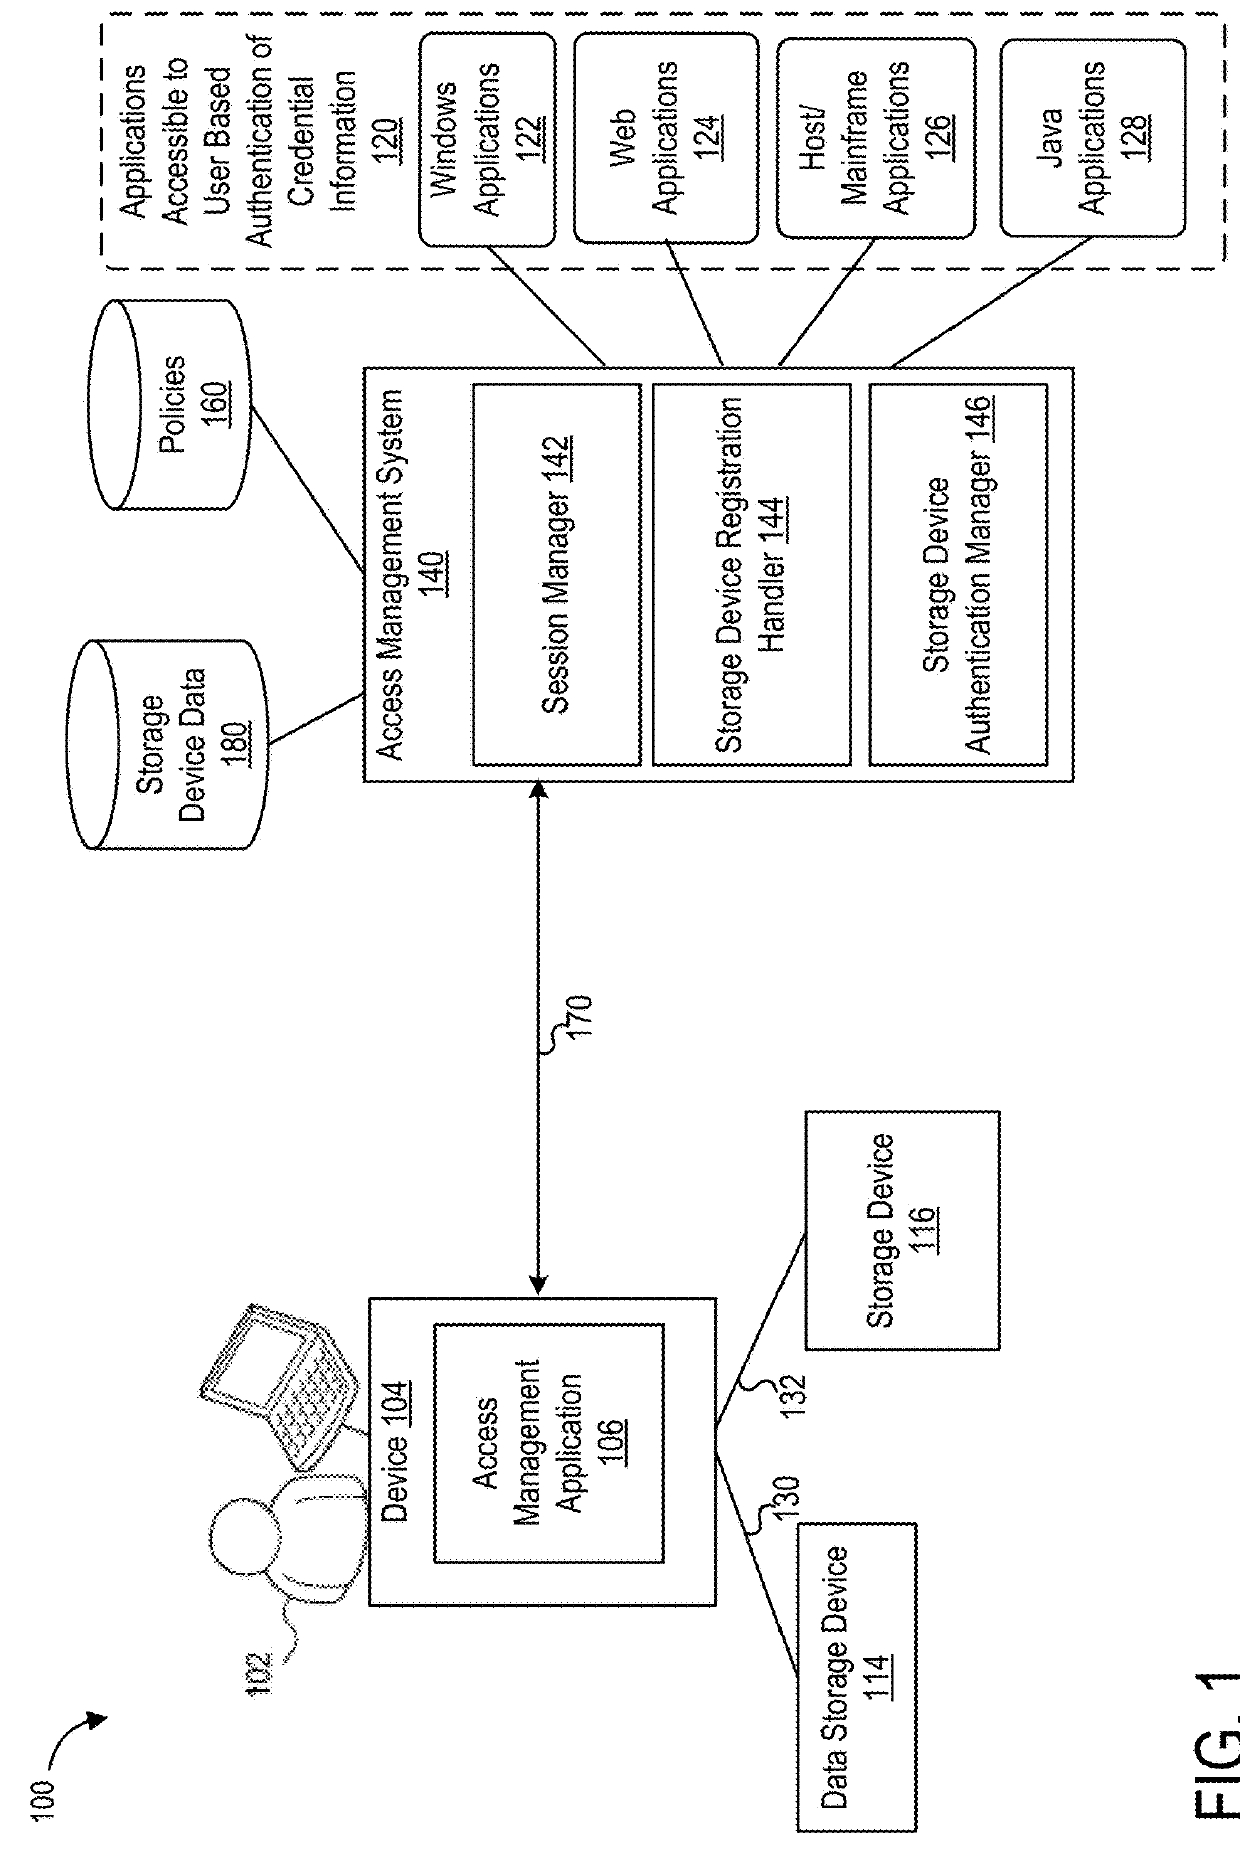 Techniques for implementing a data storage device as a security device for managing access to resources